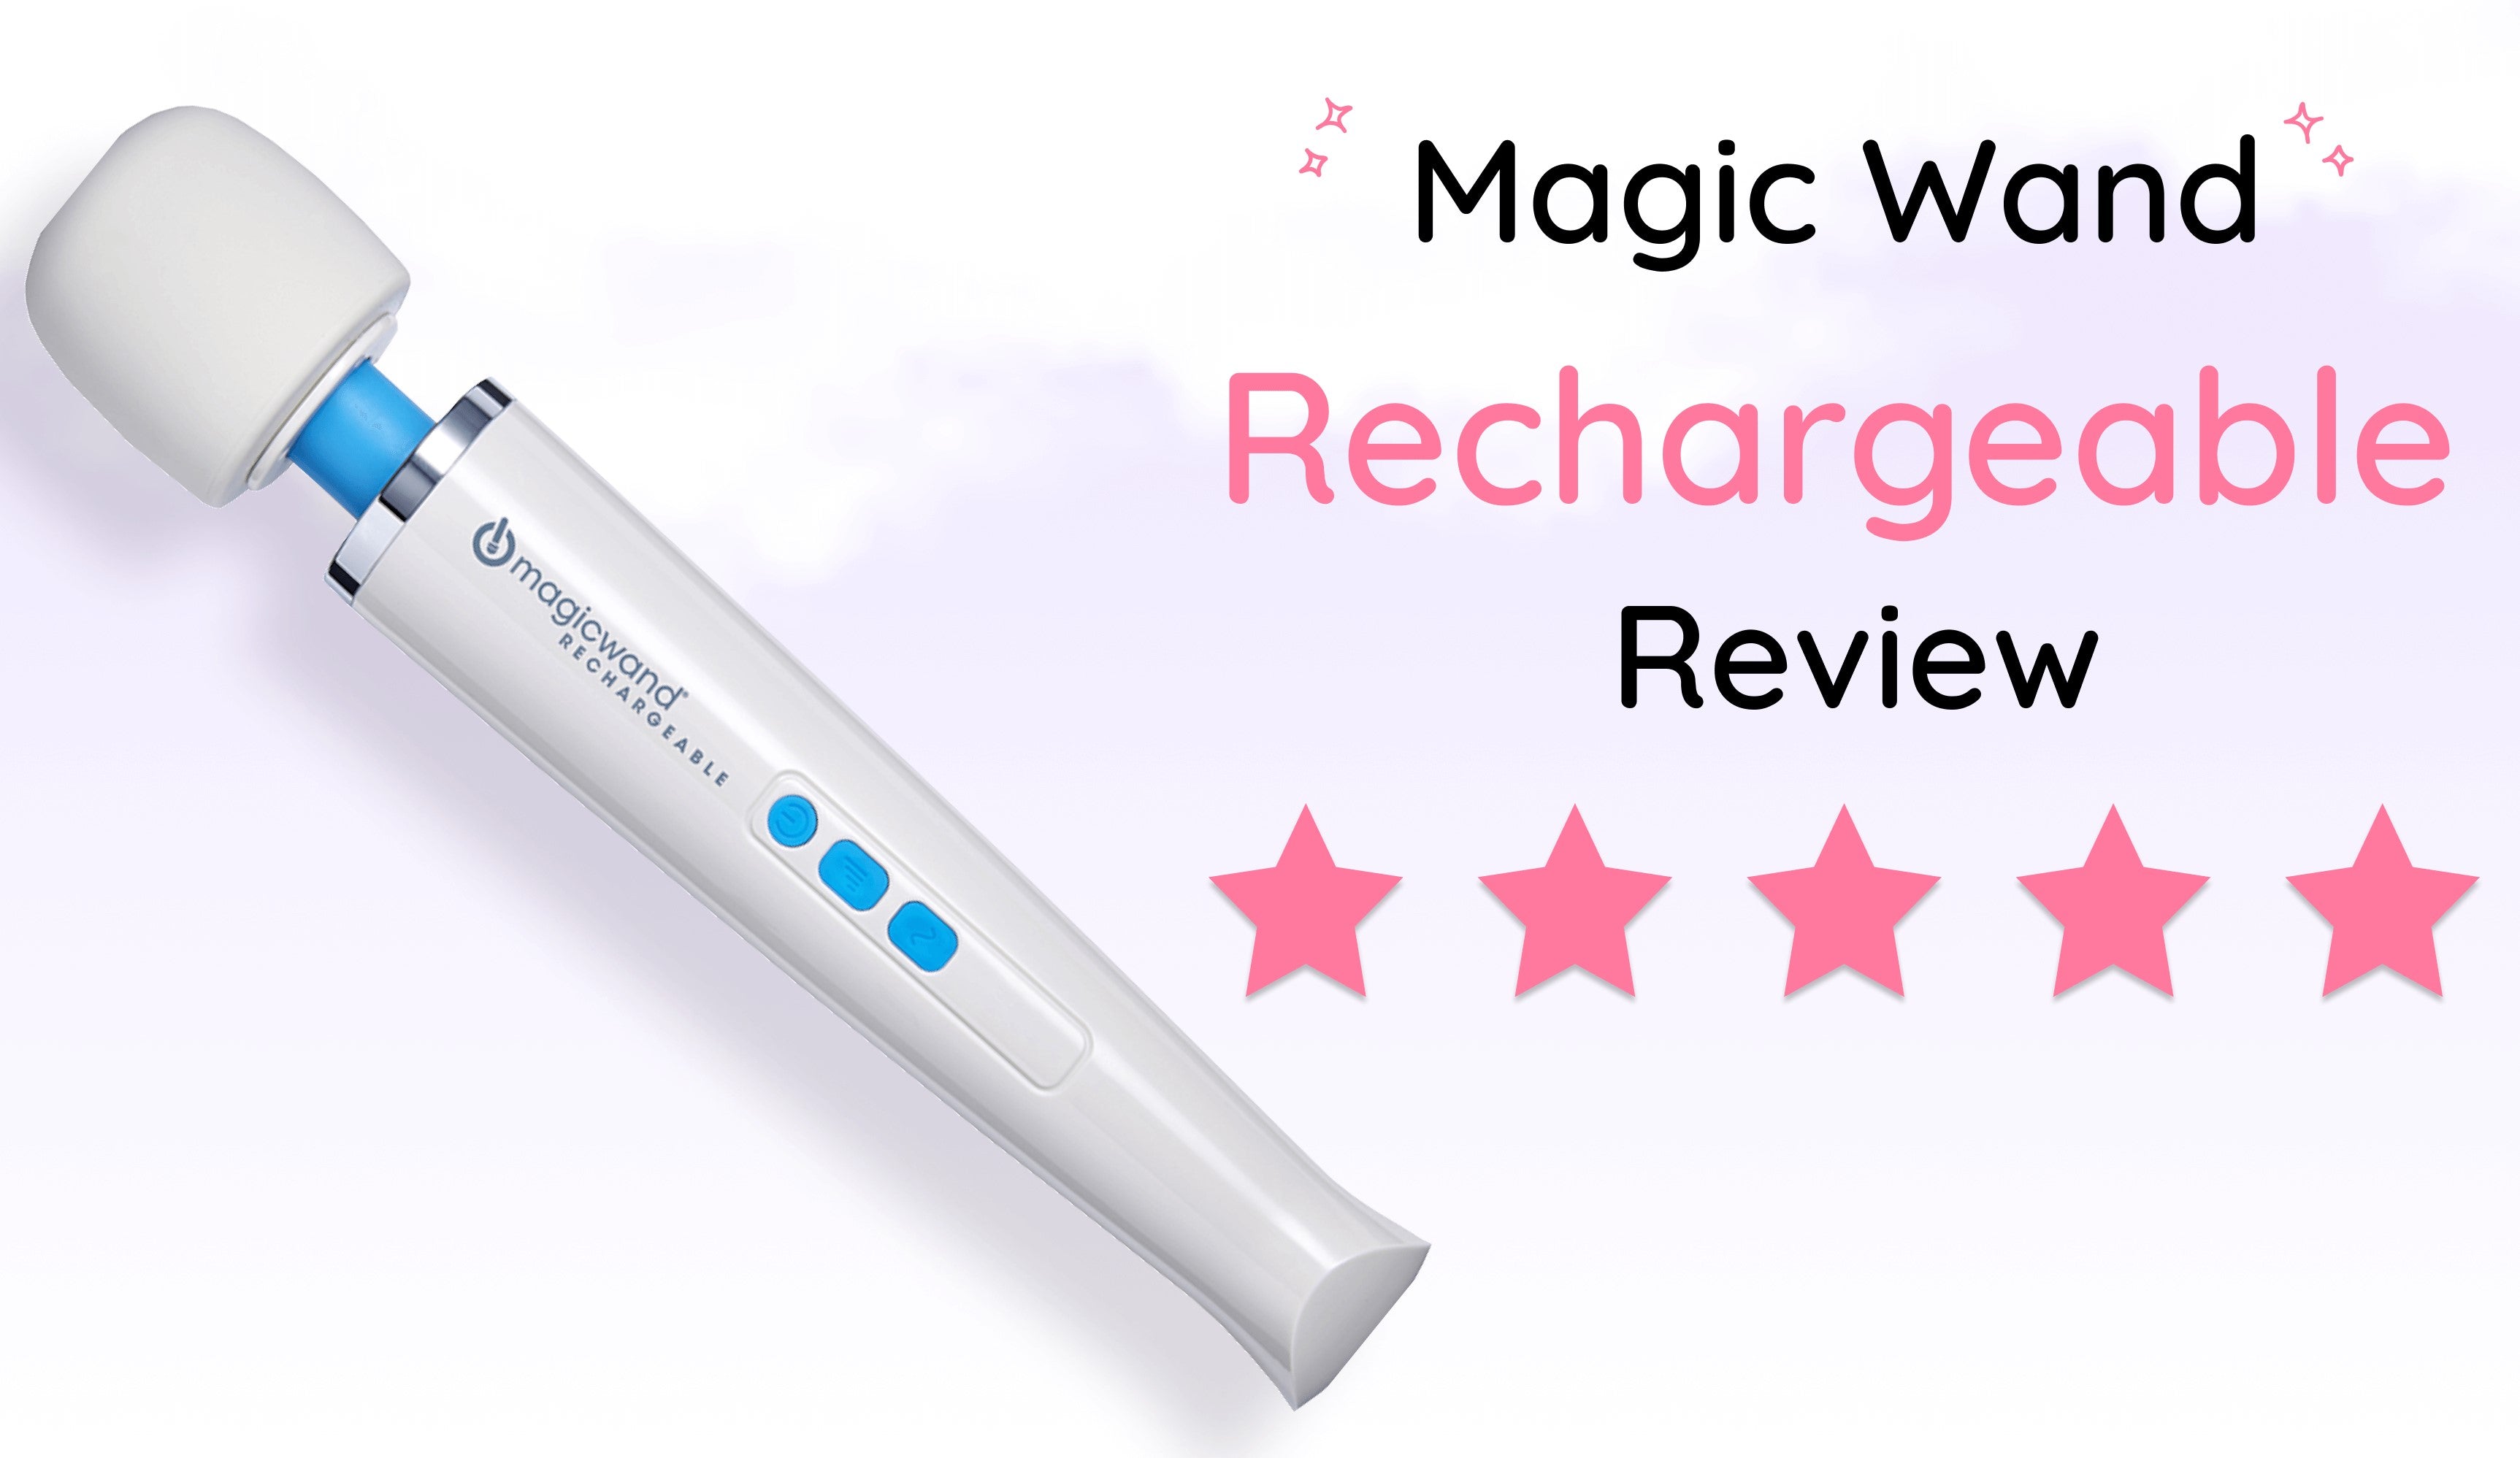 Magic Wand Rechargeable Review: Everything You Need to Know